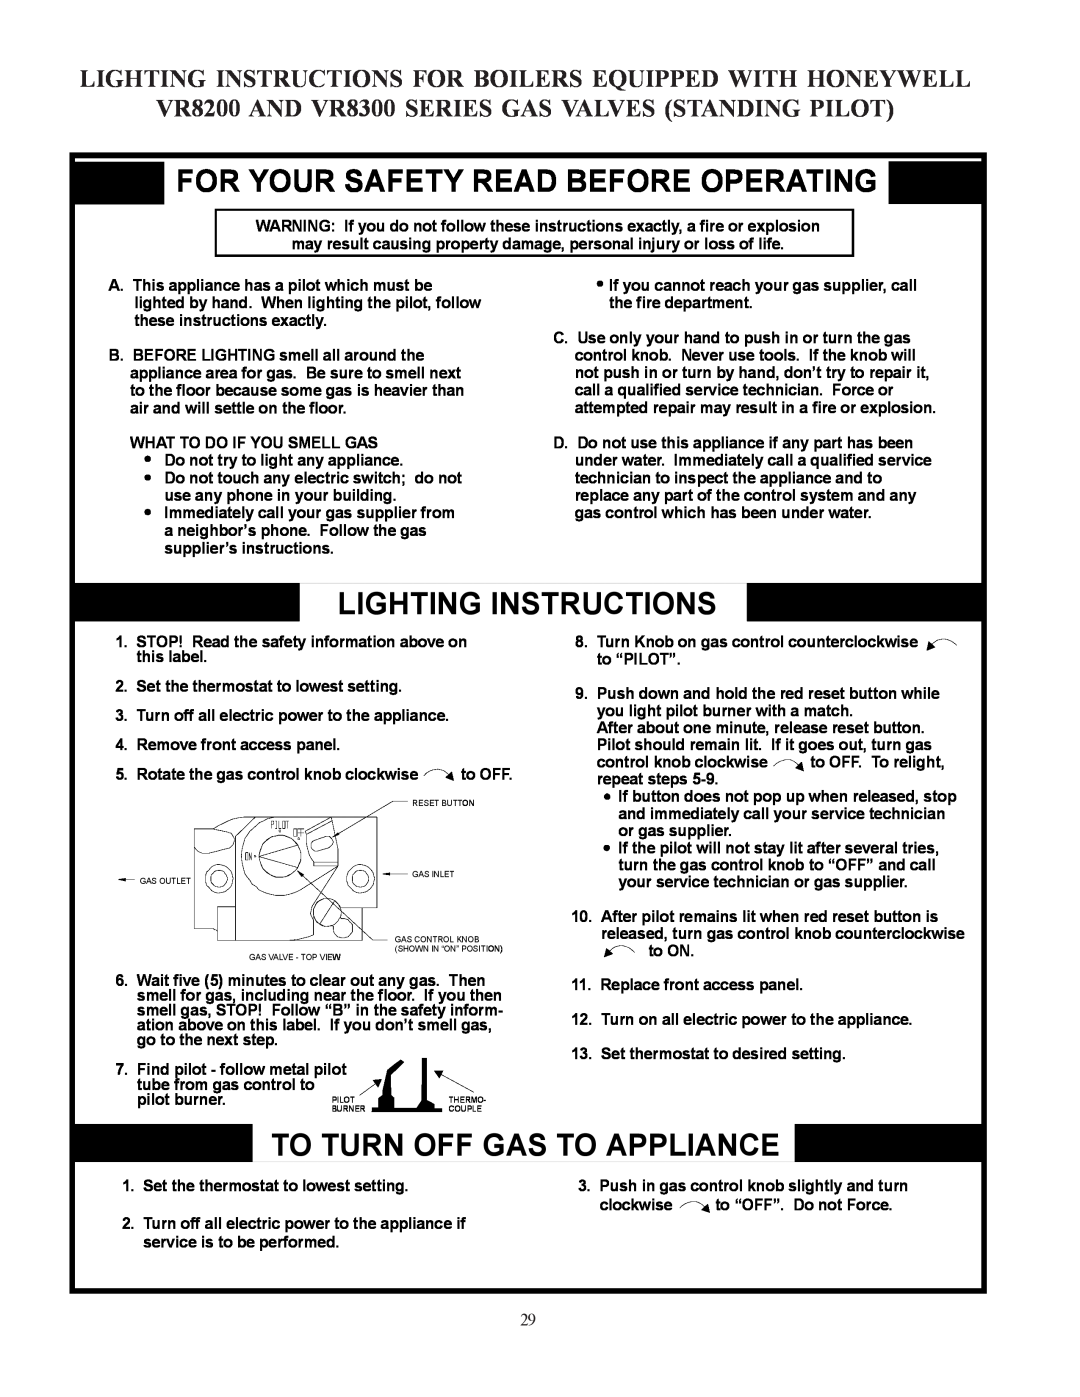 Crown Boiler CWI379 For Your Safety Read Before Operating, Lighting Instructions, To Turn Off Gas To Appliance, 3029 